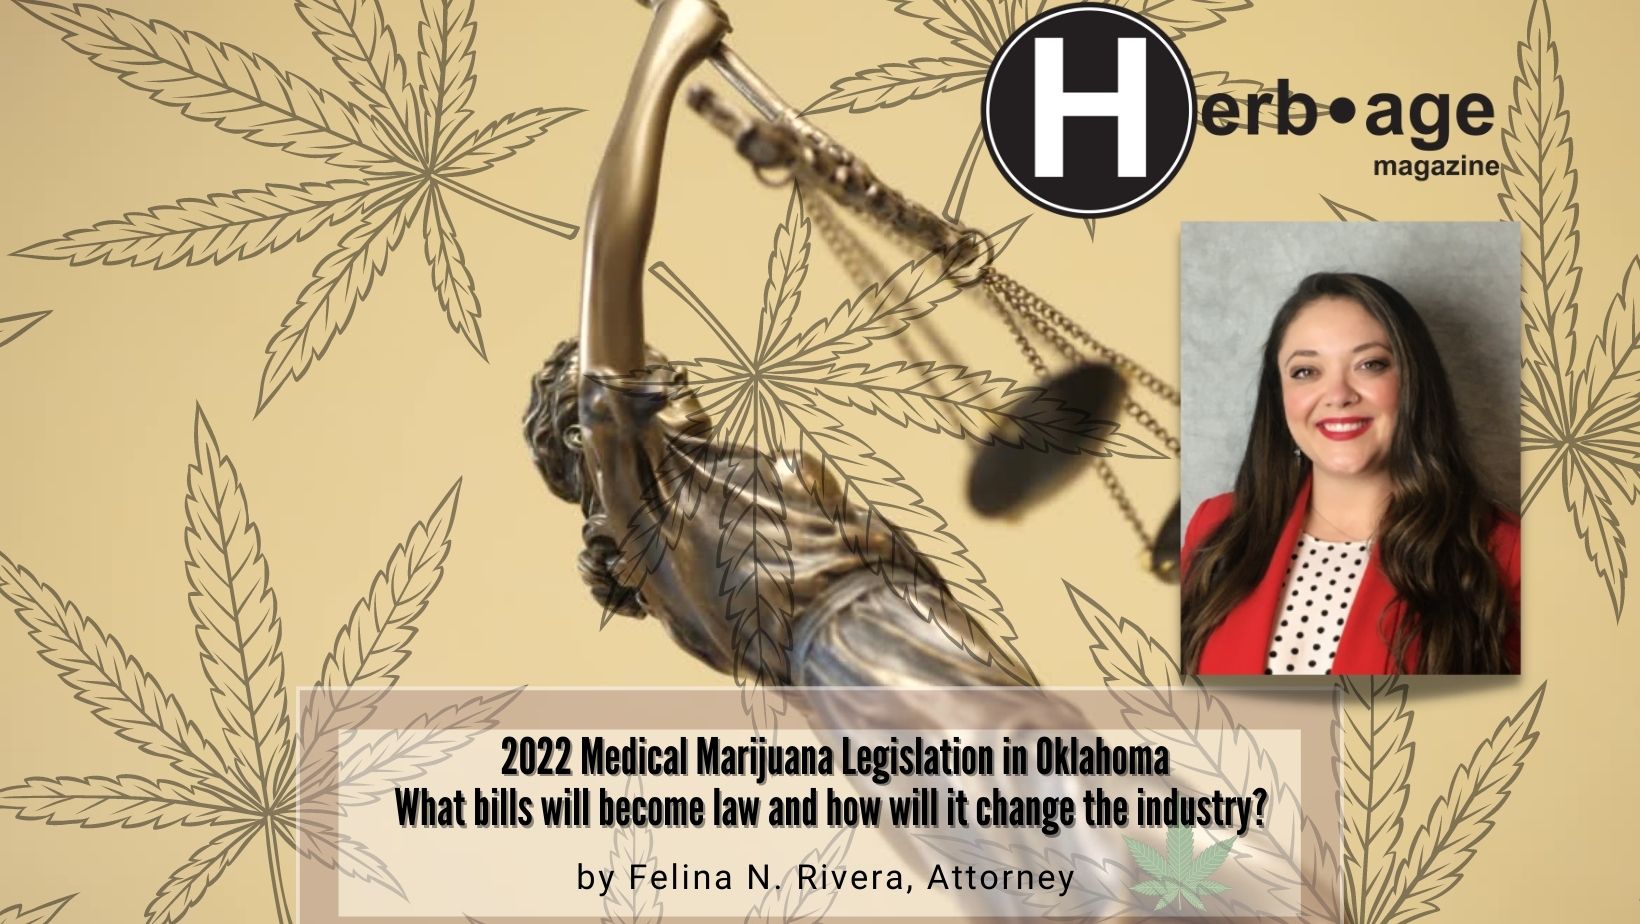 2022 Medical Marijuana Legislation in Oklahoma  What bills will become law and how will it change the industry?